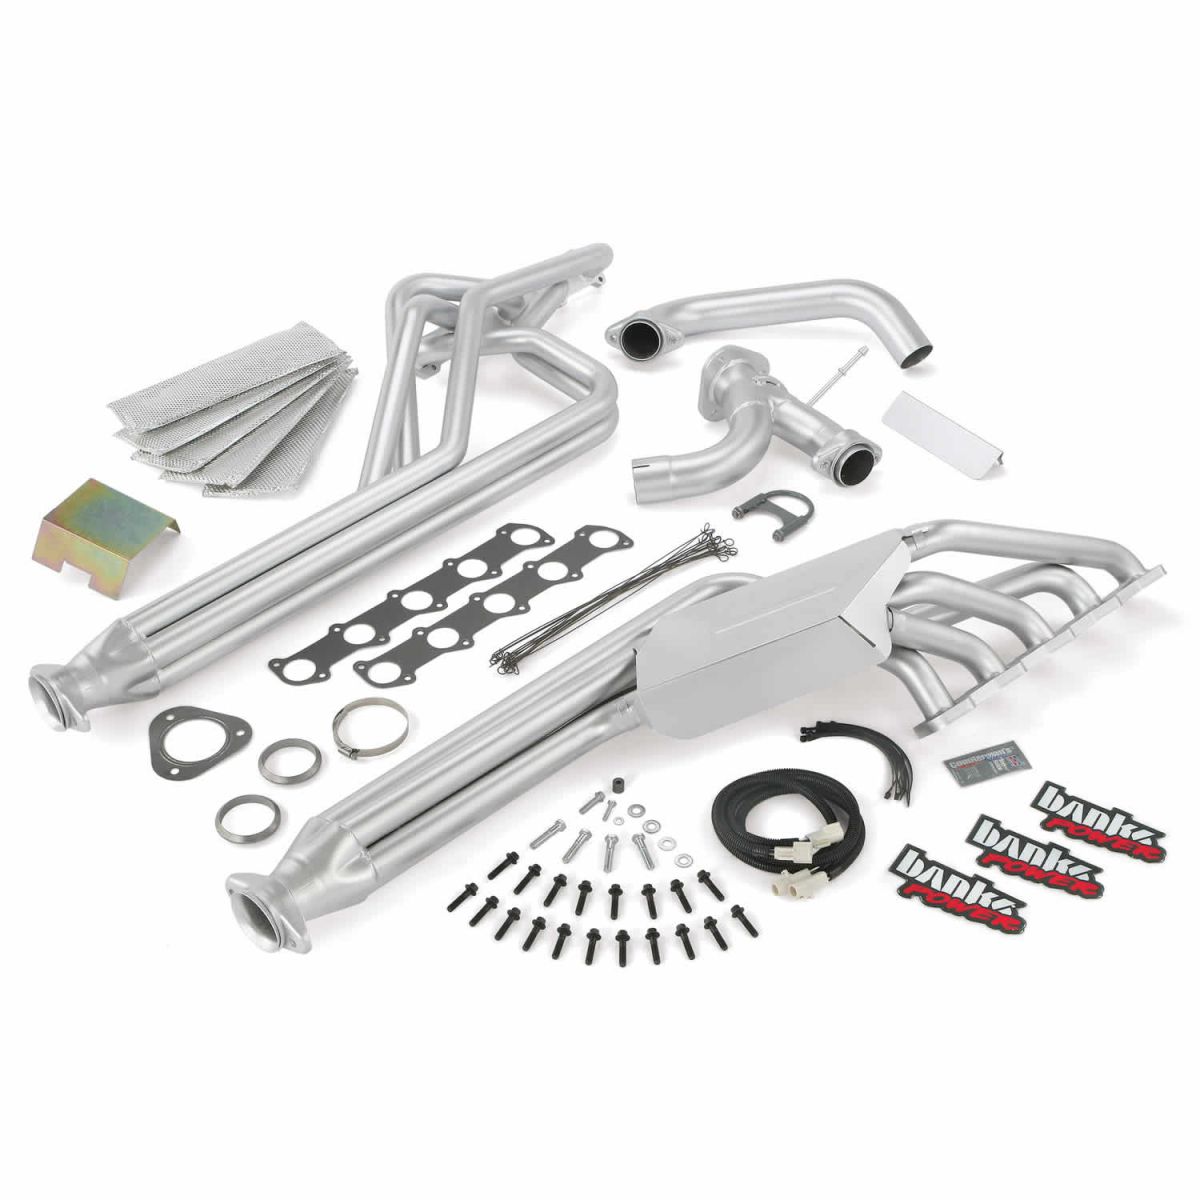 Banks Power - Banks Power Torque Tube Exhaust Header System 97-04 Ford 6.8L Class-C Motorhome E-350 W/EGR